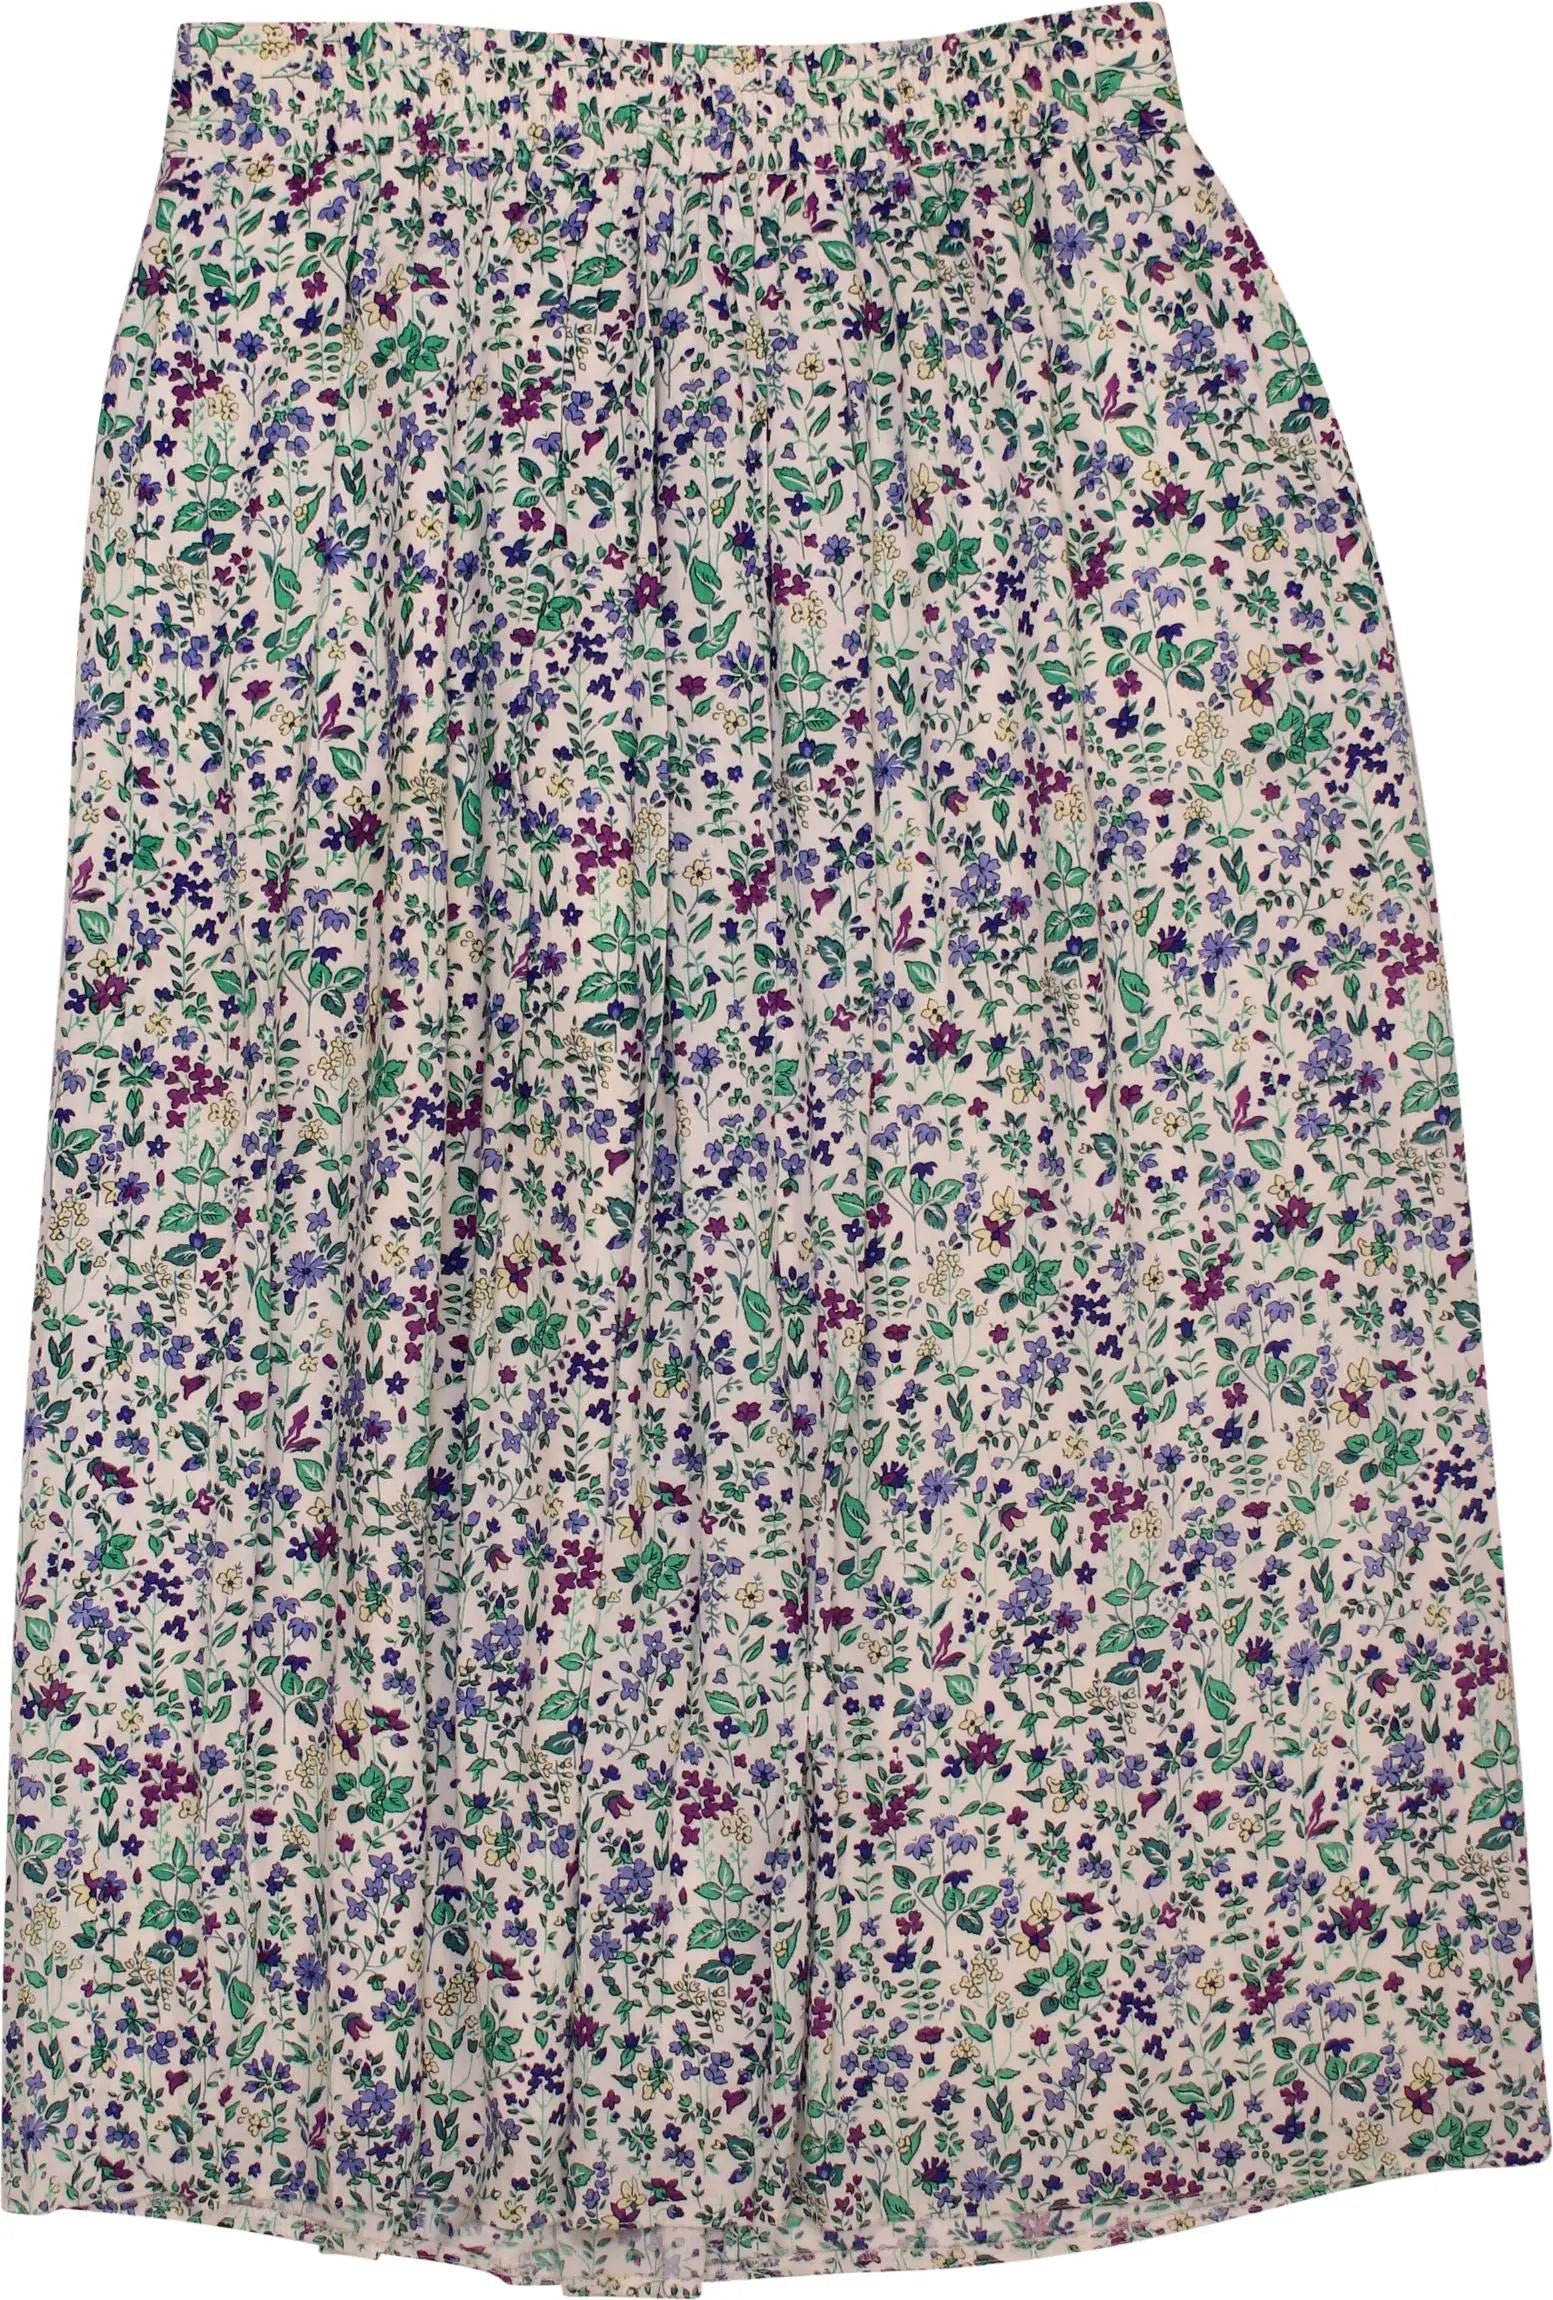 Gerry Weber - Floral Midi Skirt- ThriftTale.com - Vintage and second handclothing